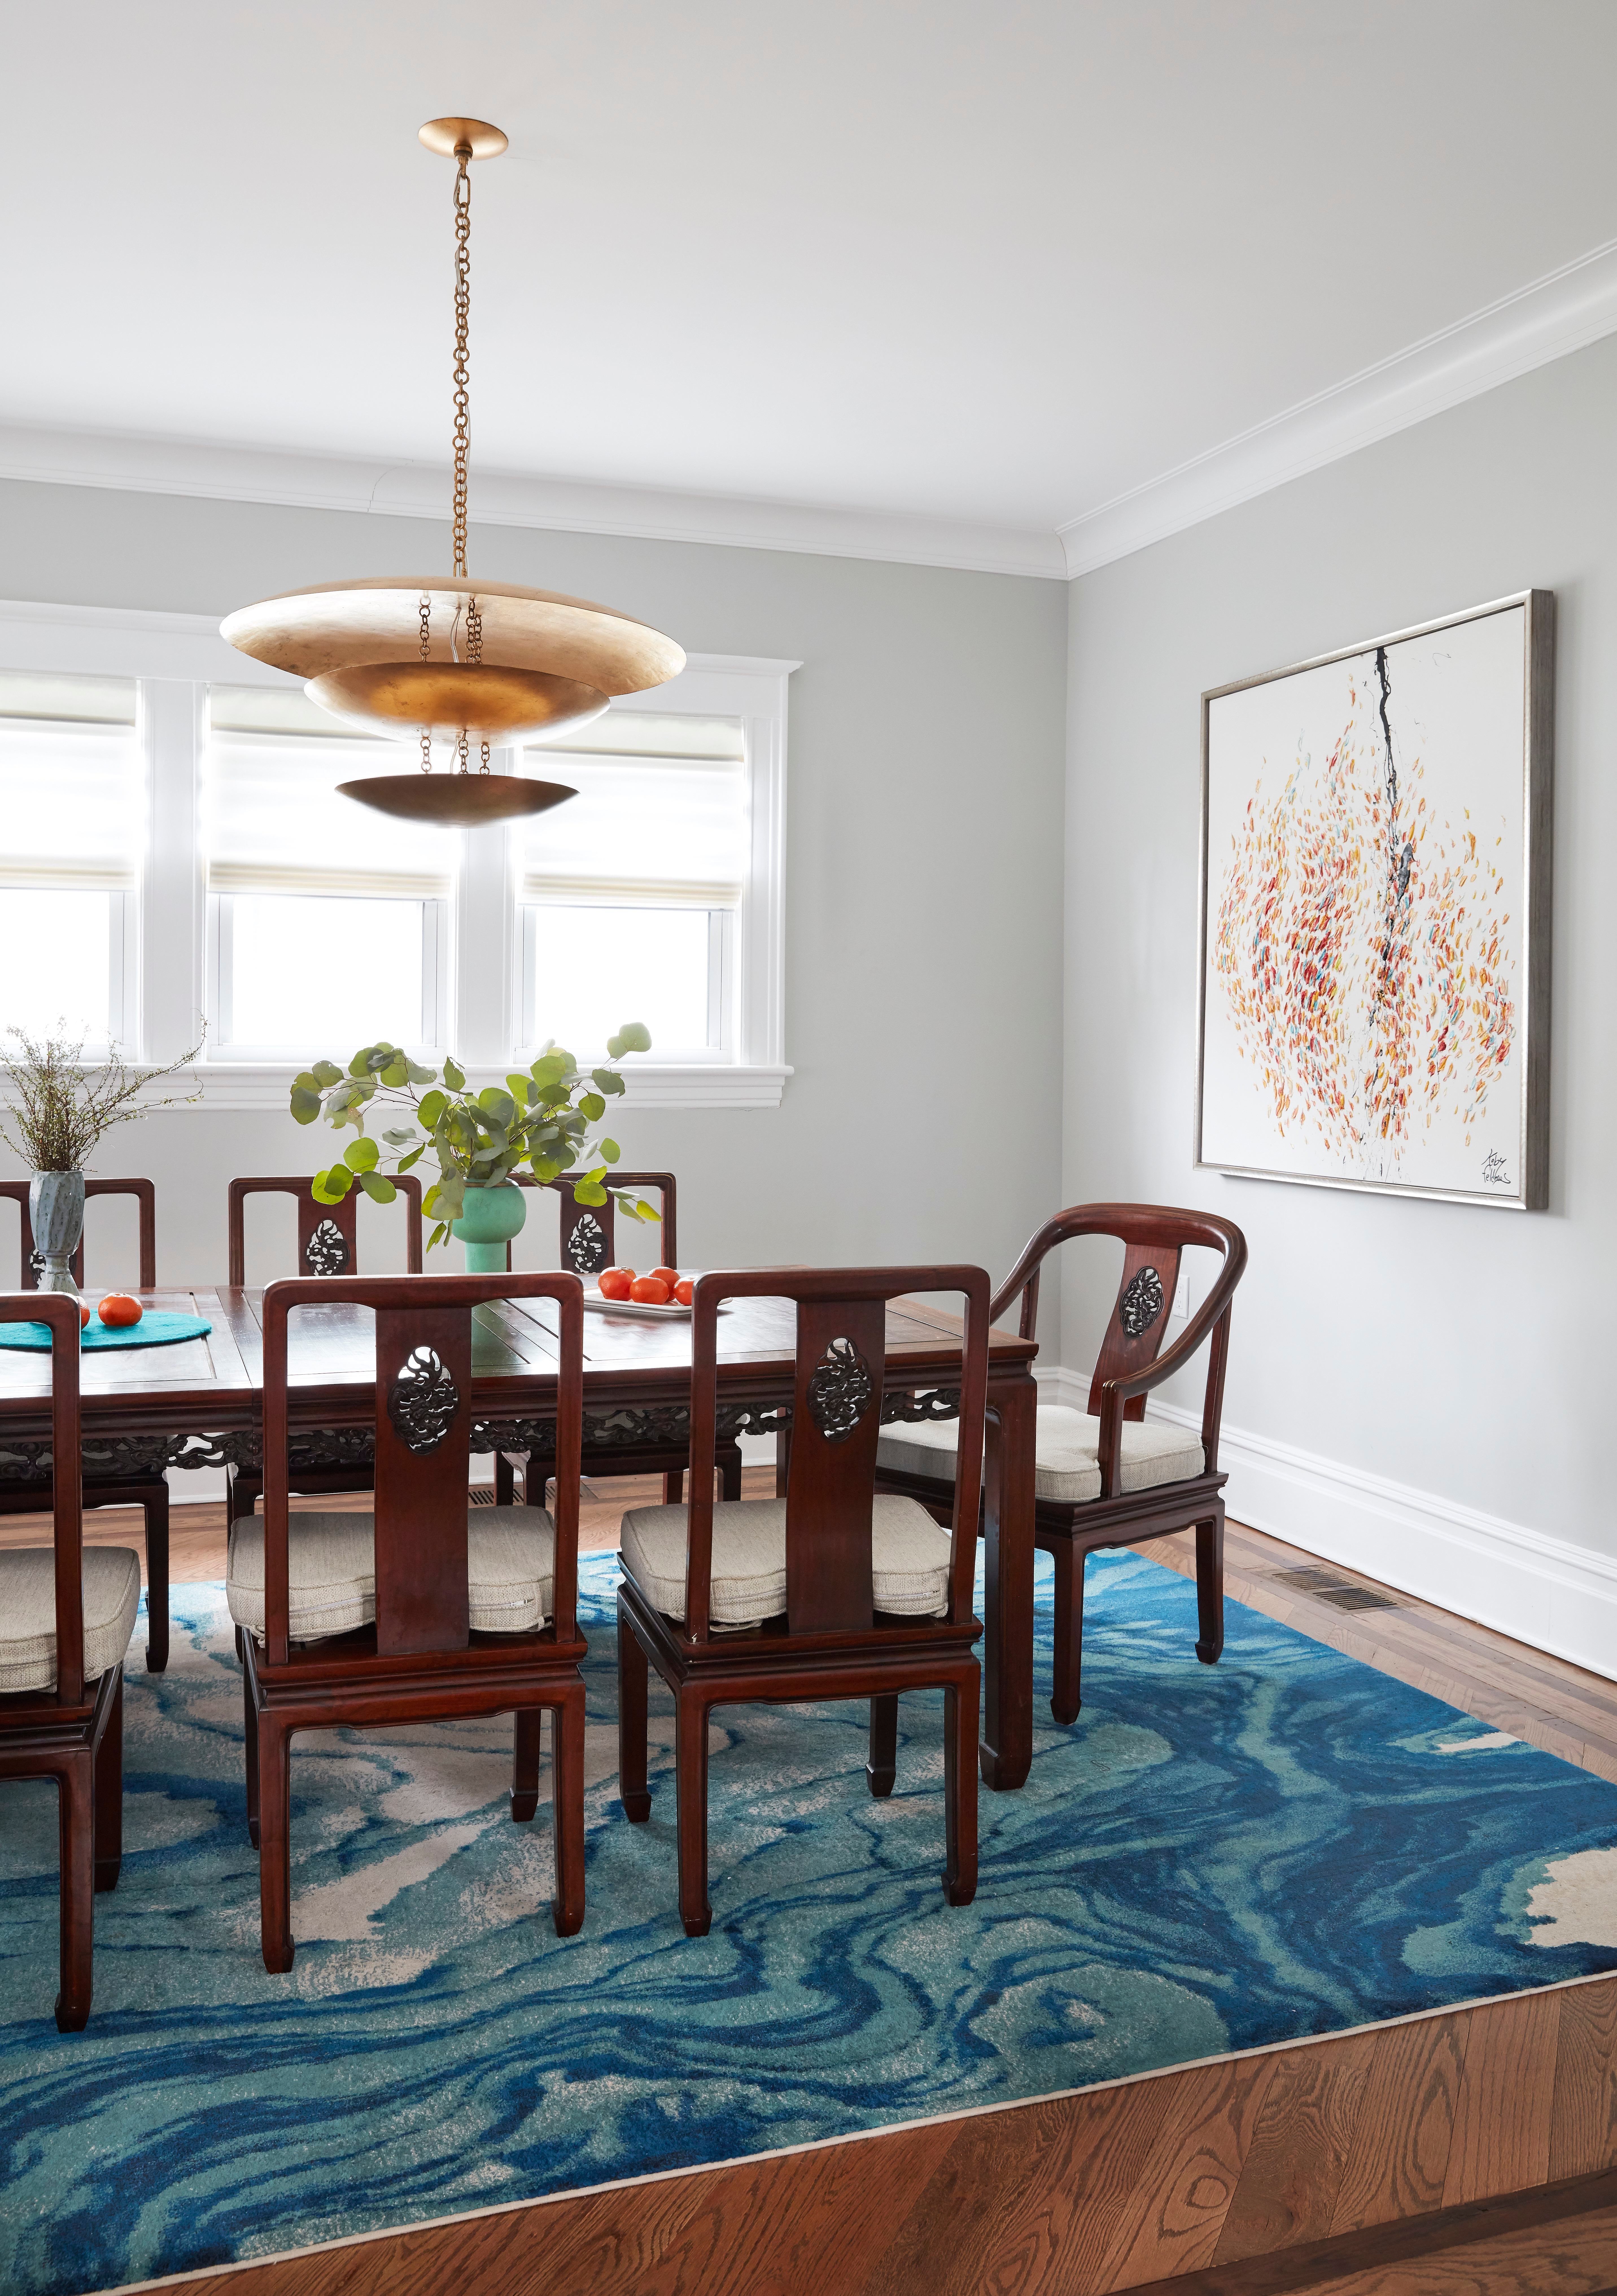 Dining Room Design Ideas   20,20 Pictures   20stDibs